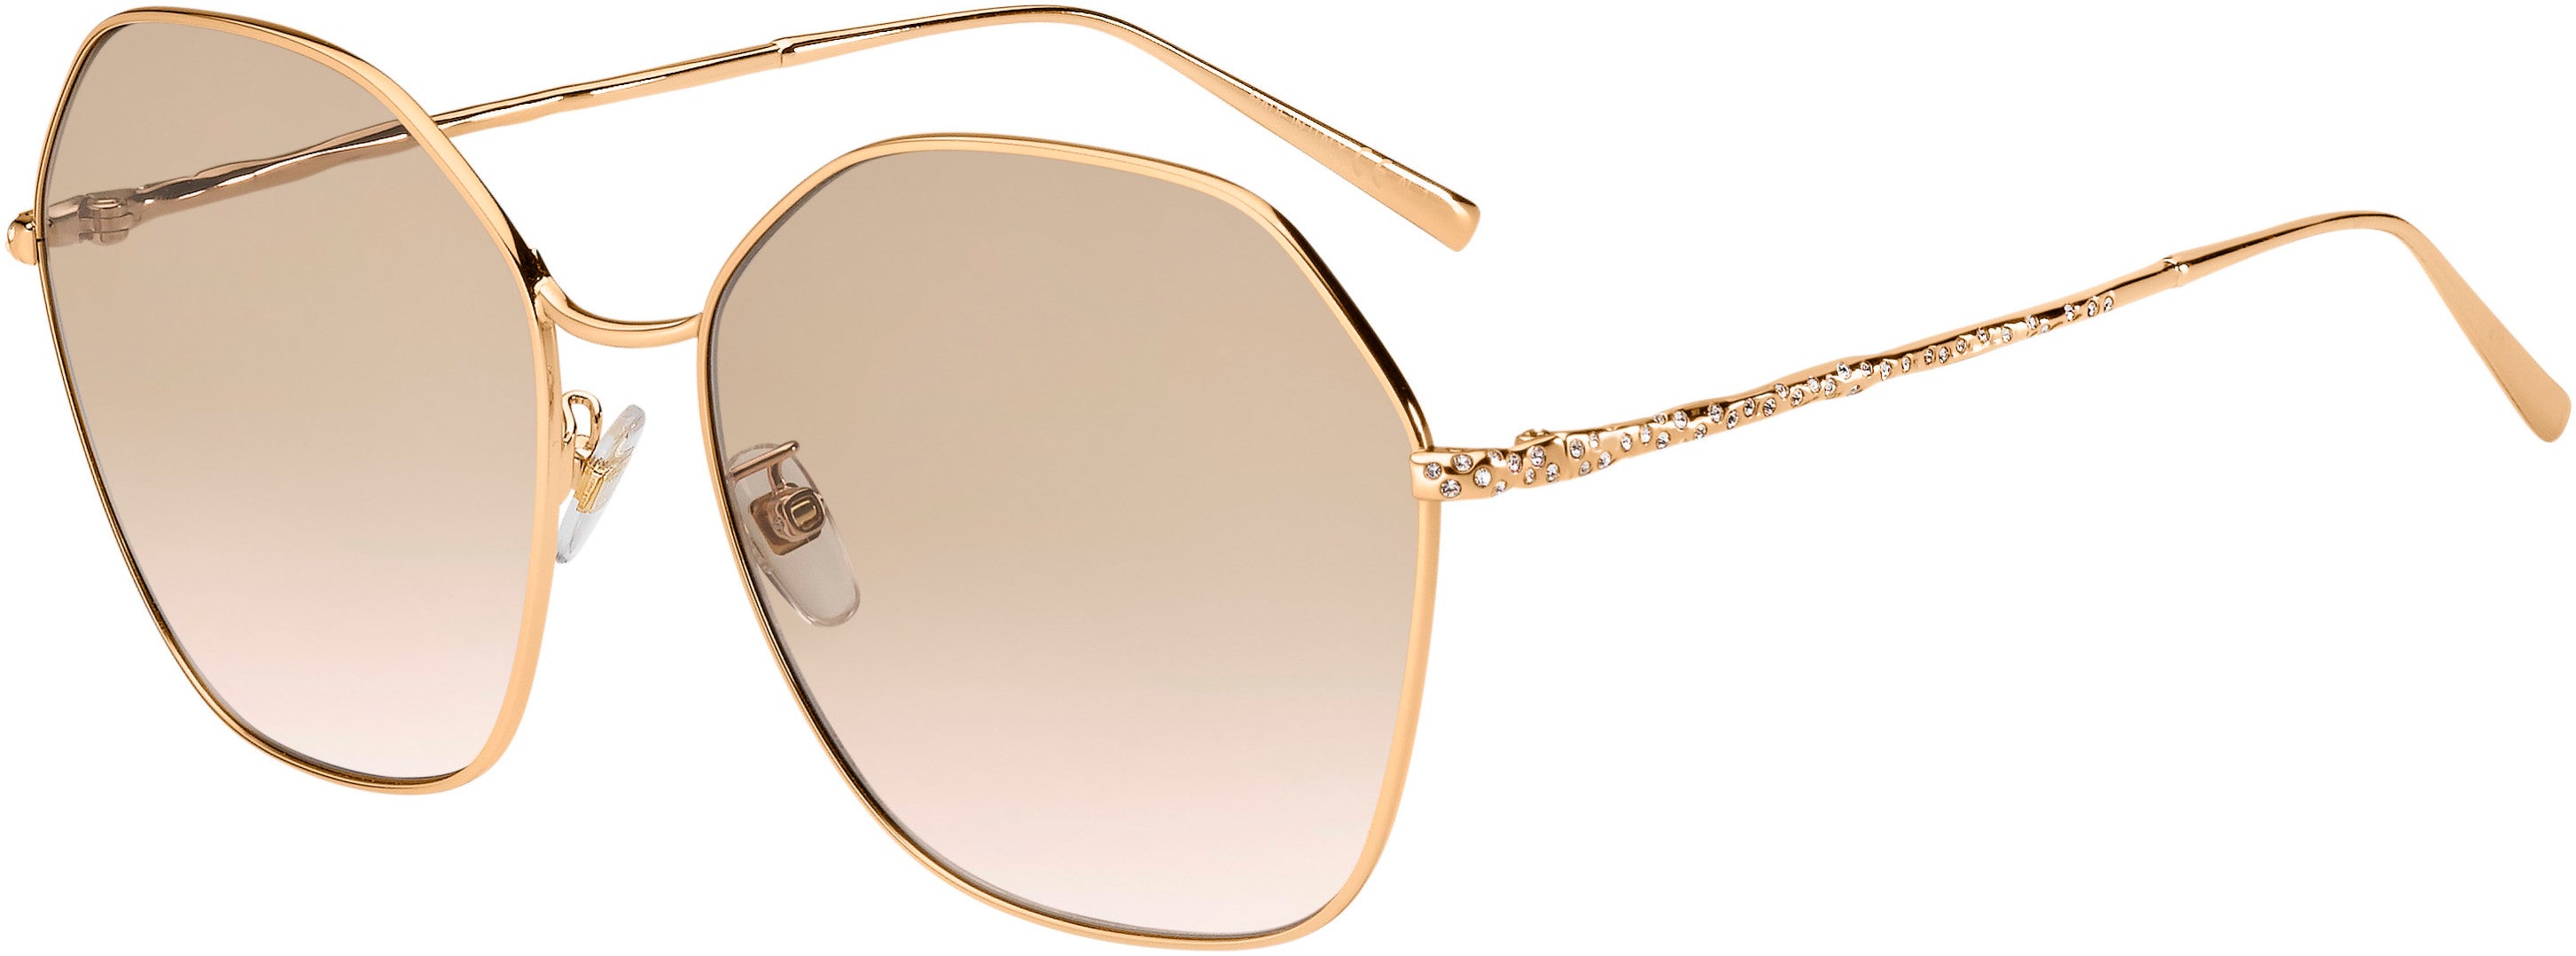  Givenchy 7171/G/S Special Shape Sunglasses 0DDB-0DDB  Gold Copper (M2 Brown Pink Gradient)